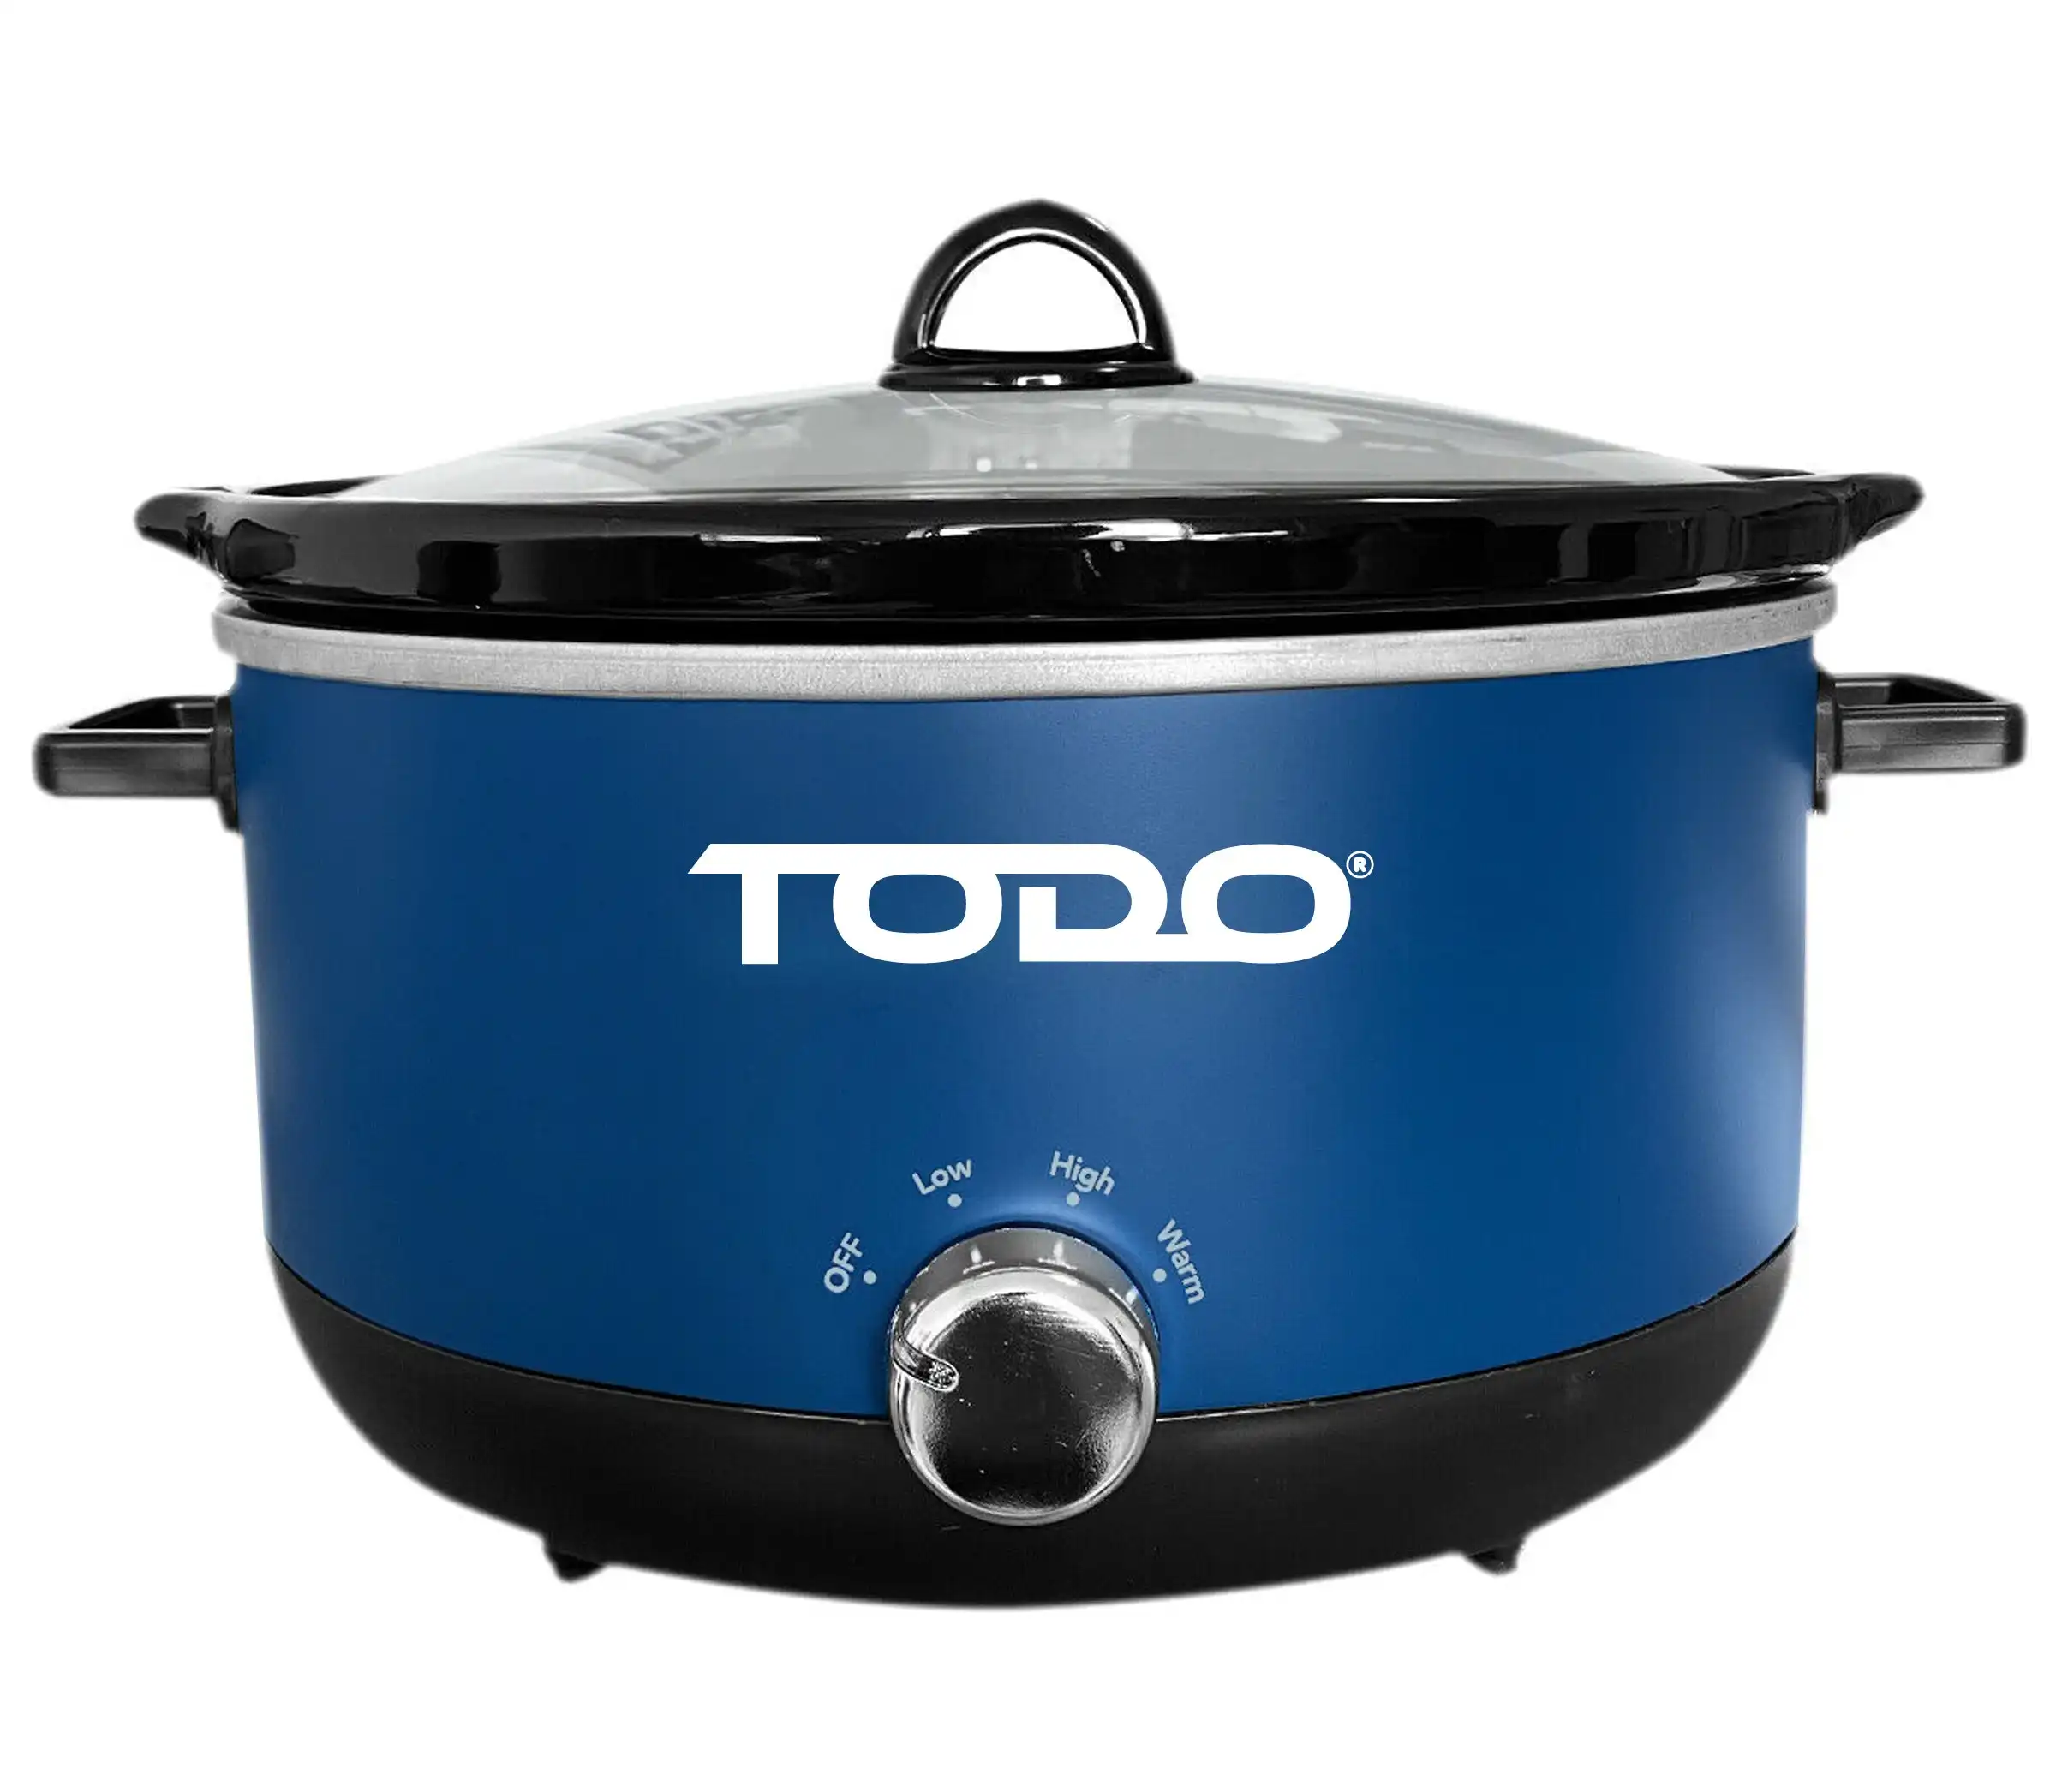 TODO 3.5L Stainless Steel Slow Cooker Removable Ceramic Bowl